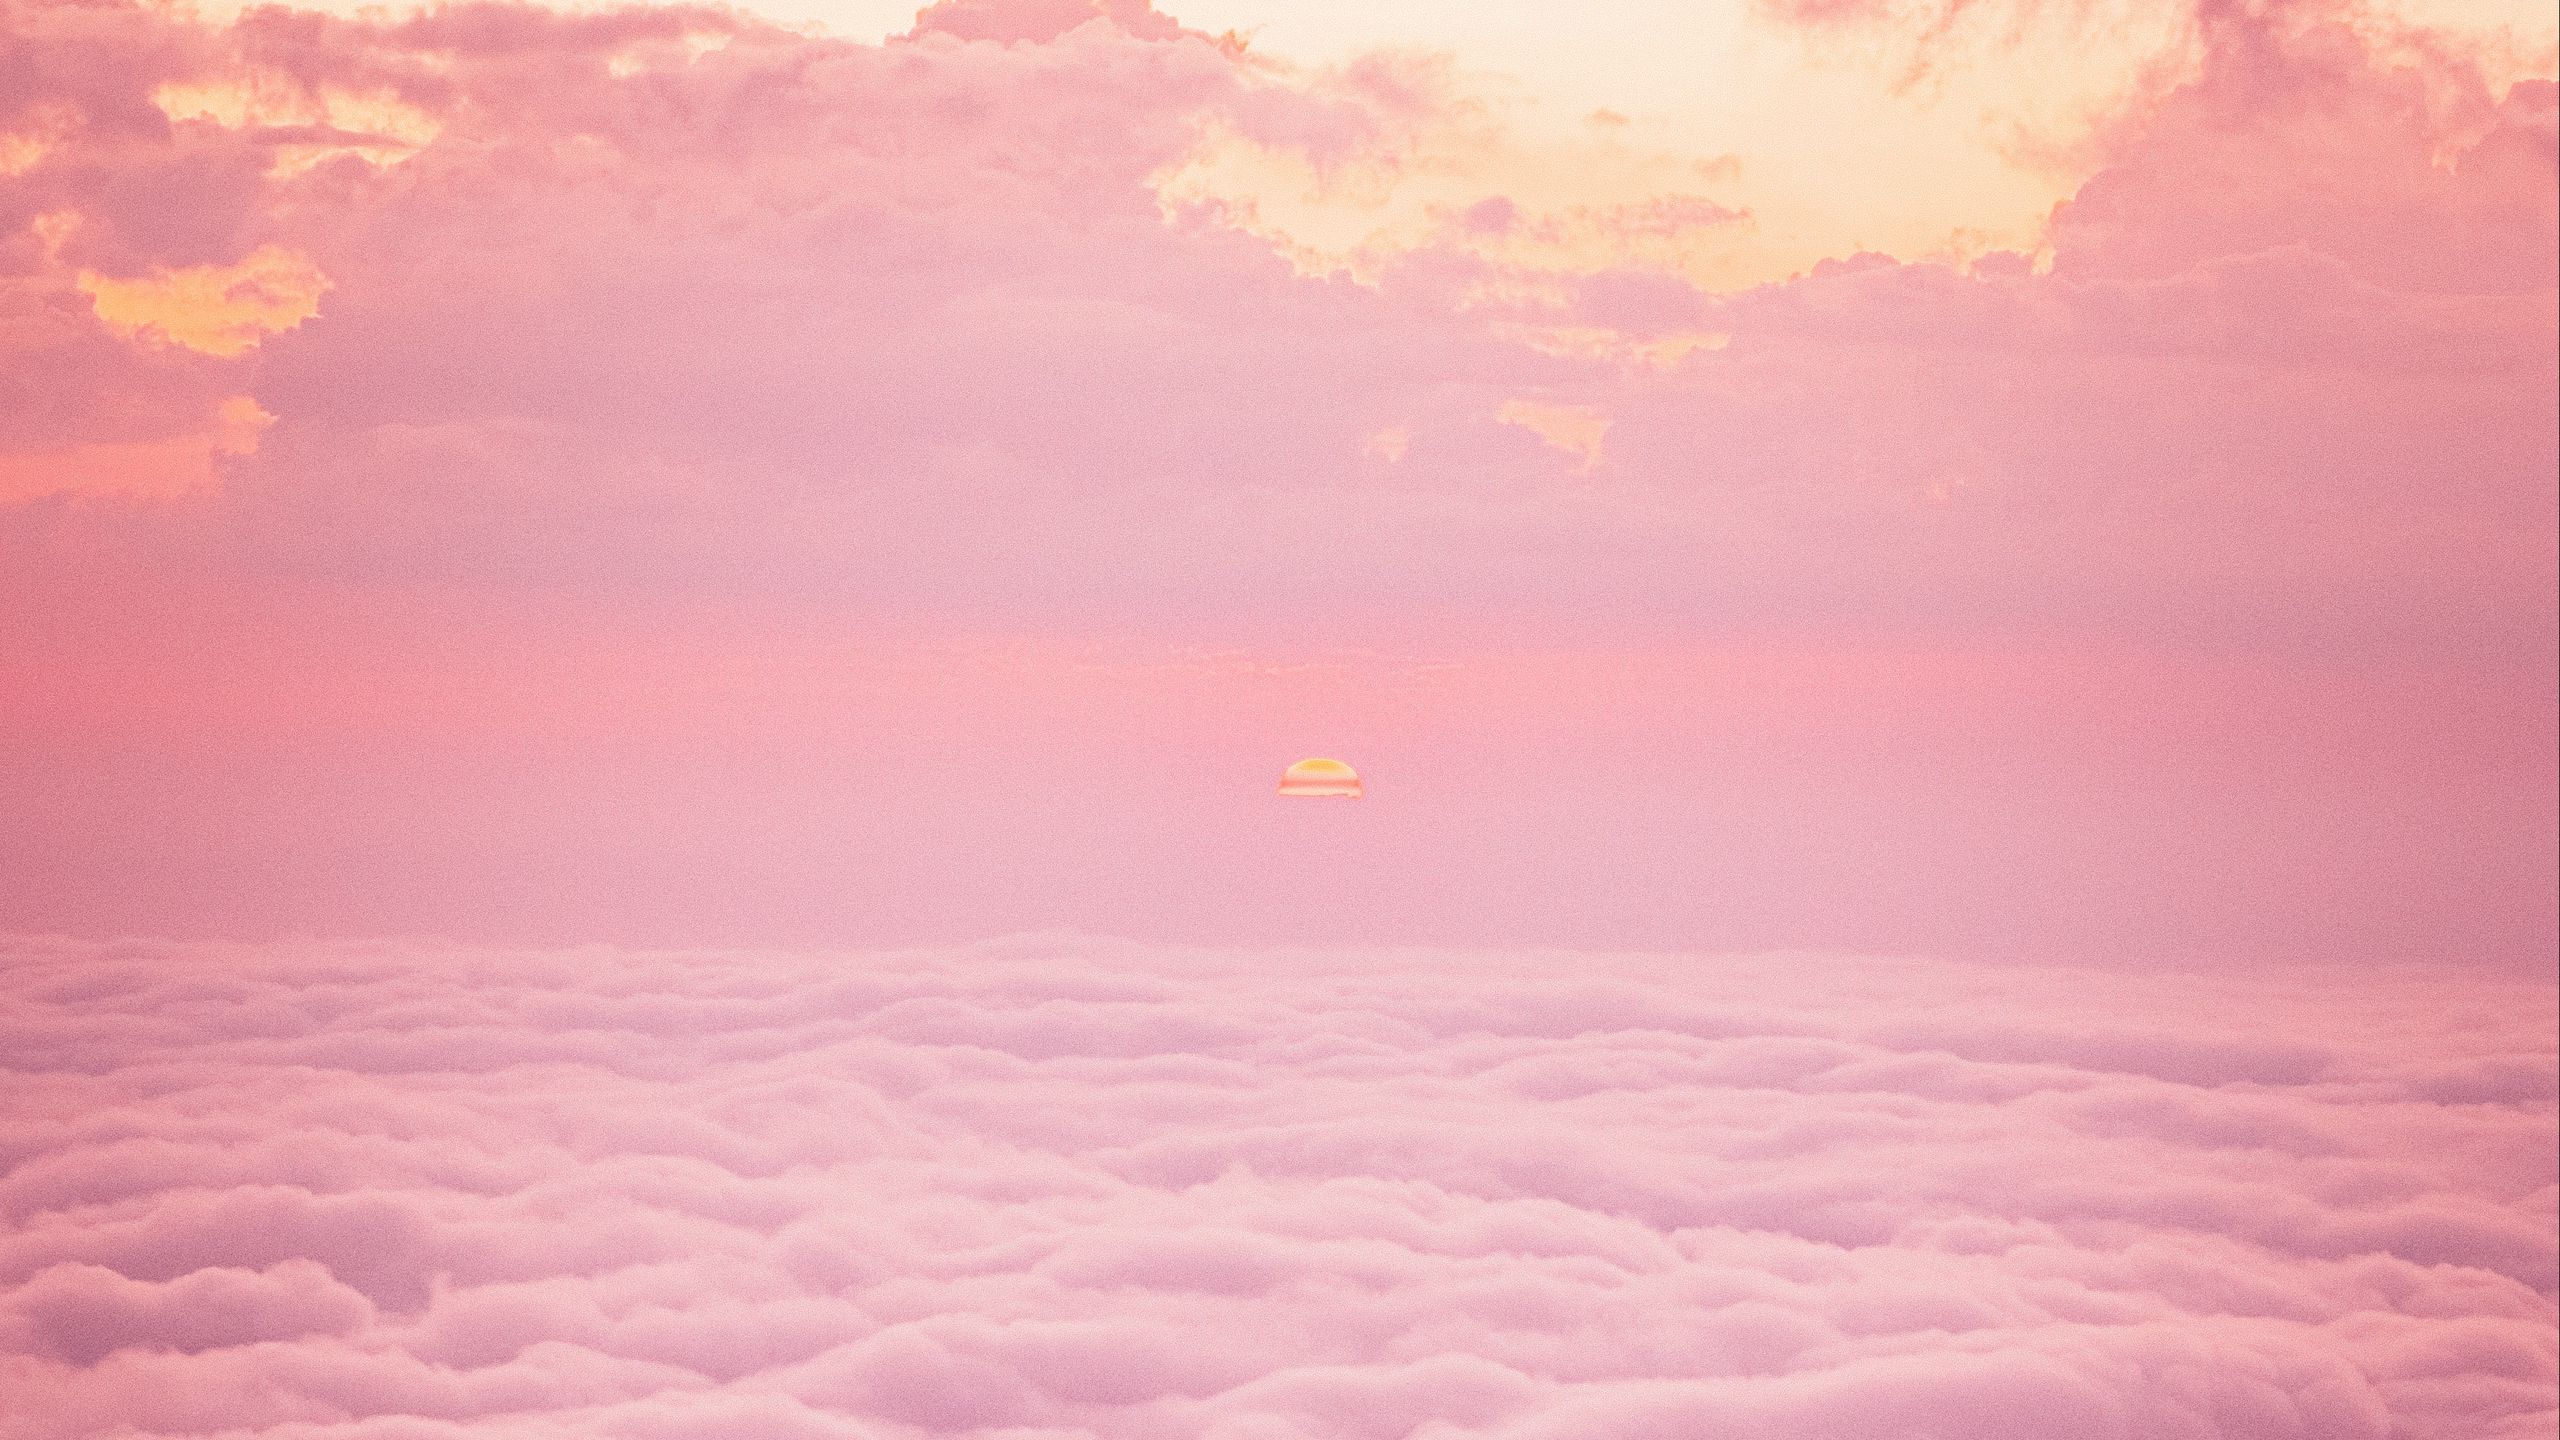 Download wallpaper 2560x1440 slope, hill, clouds, sunset, pink widescreen 16:9 HD background